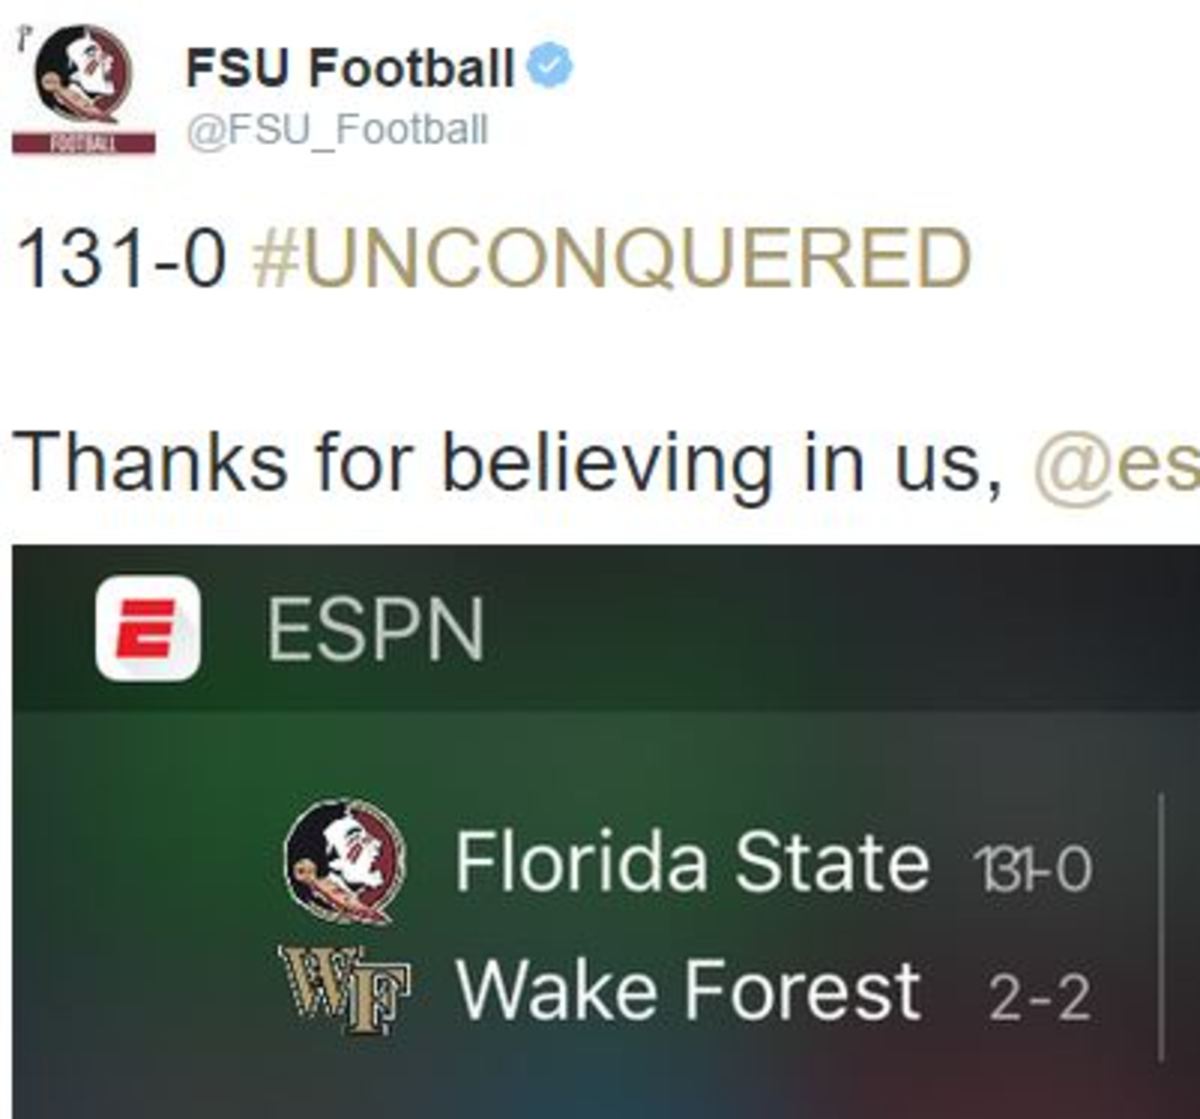 FSU Twitter page thans ESPN for giving them a 131-0 record.